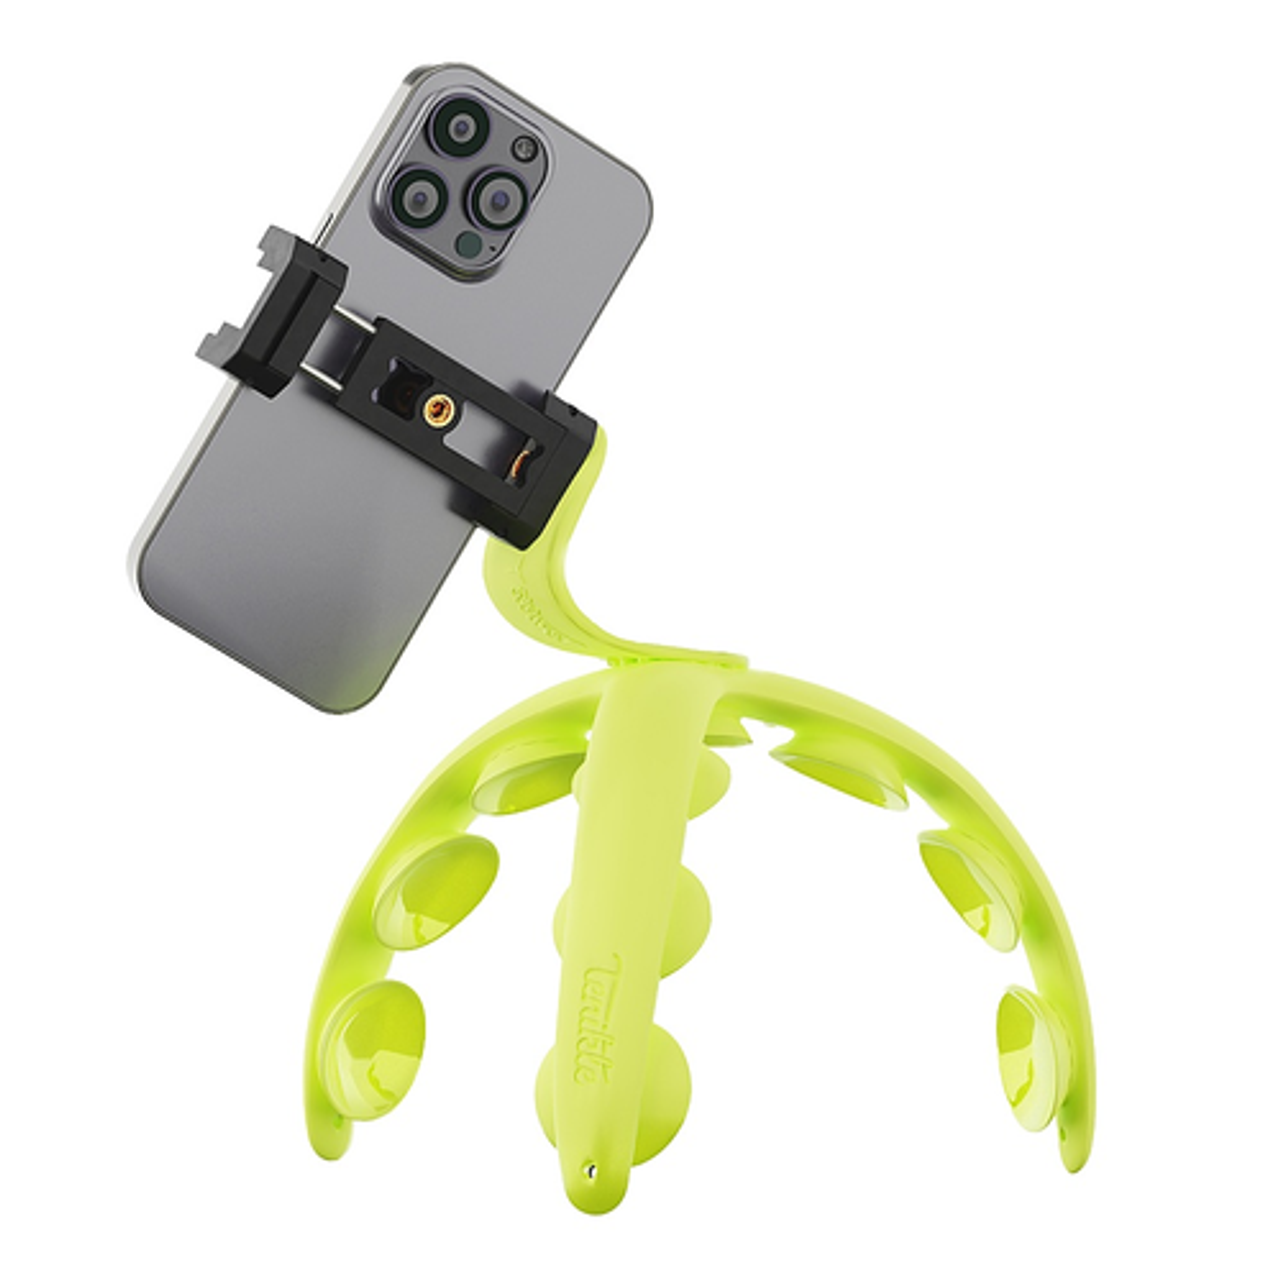 Tenikle - PRO Bendable Suction Cup Tripod Mount - Yellow